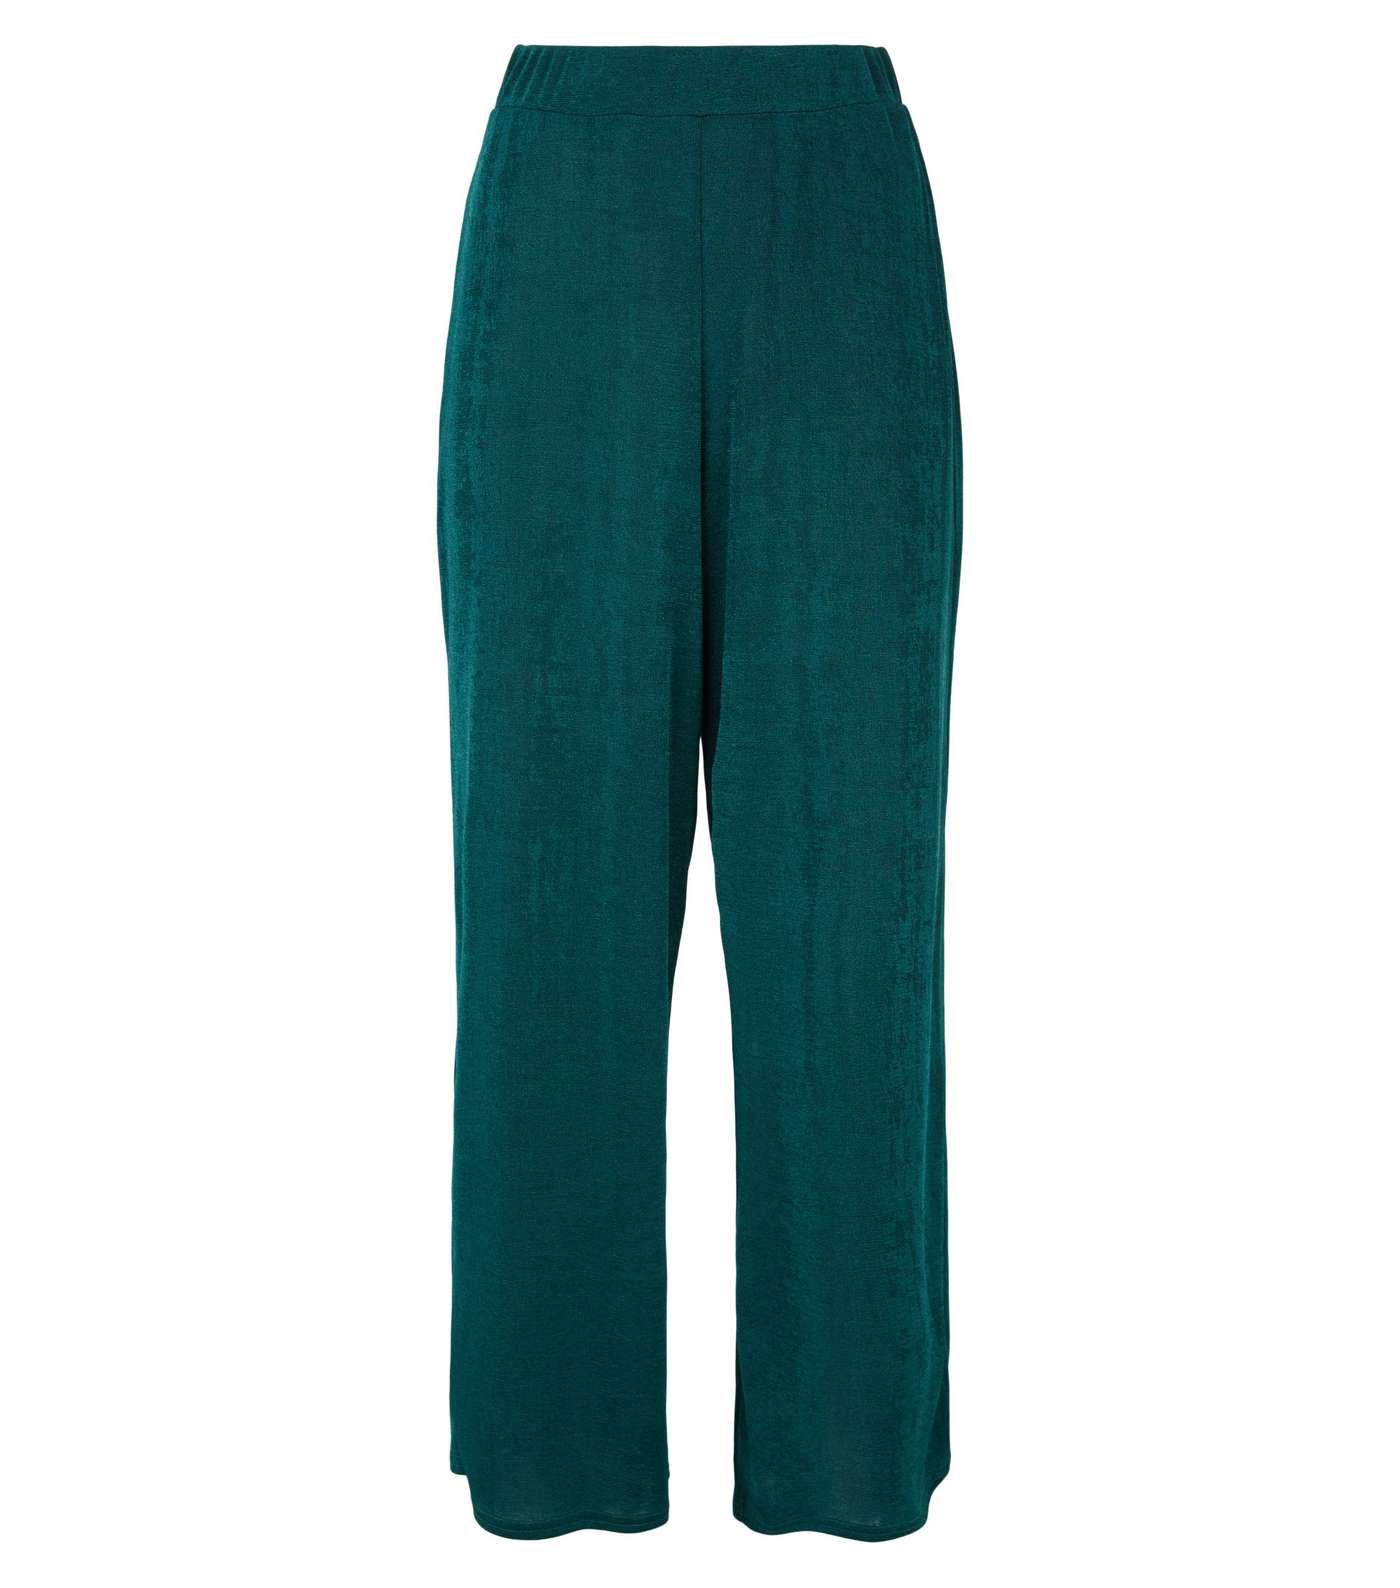 Urban Bliss Teal High Shine Trousers Image 4